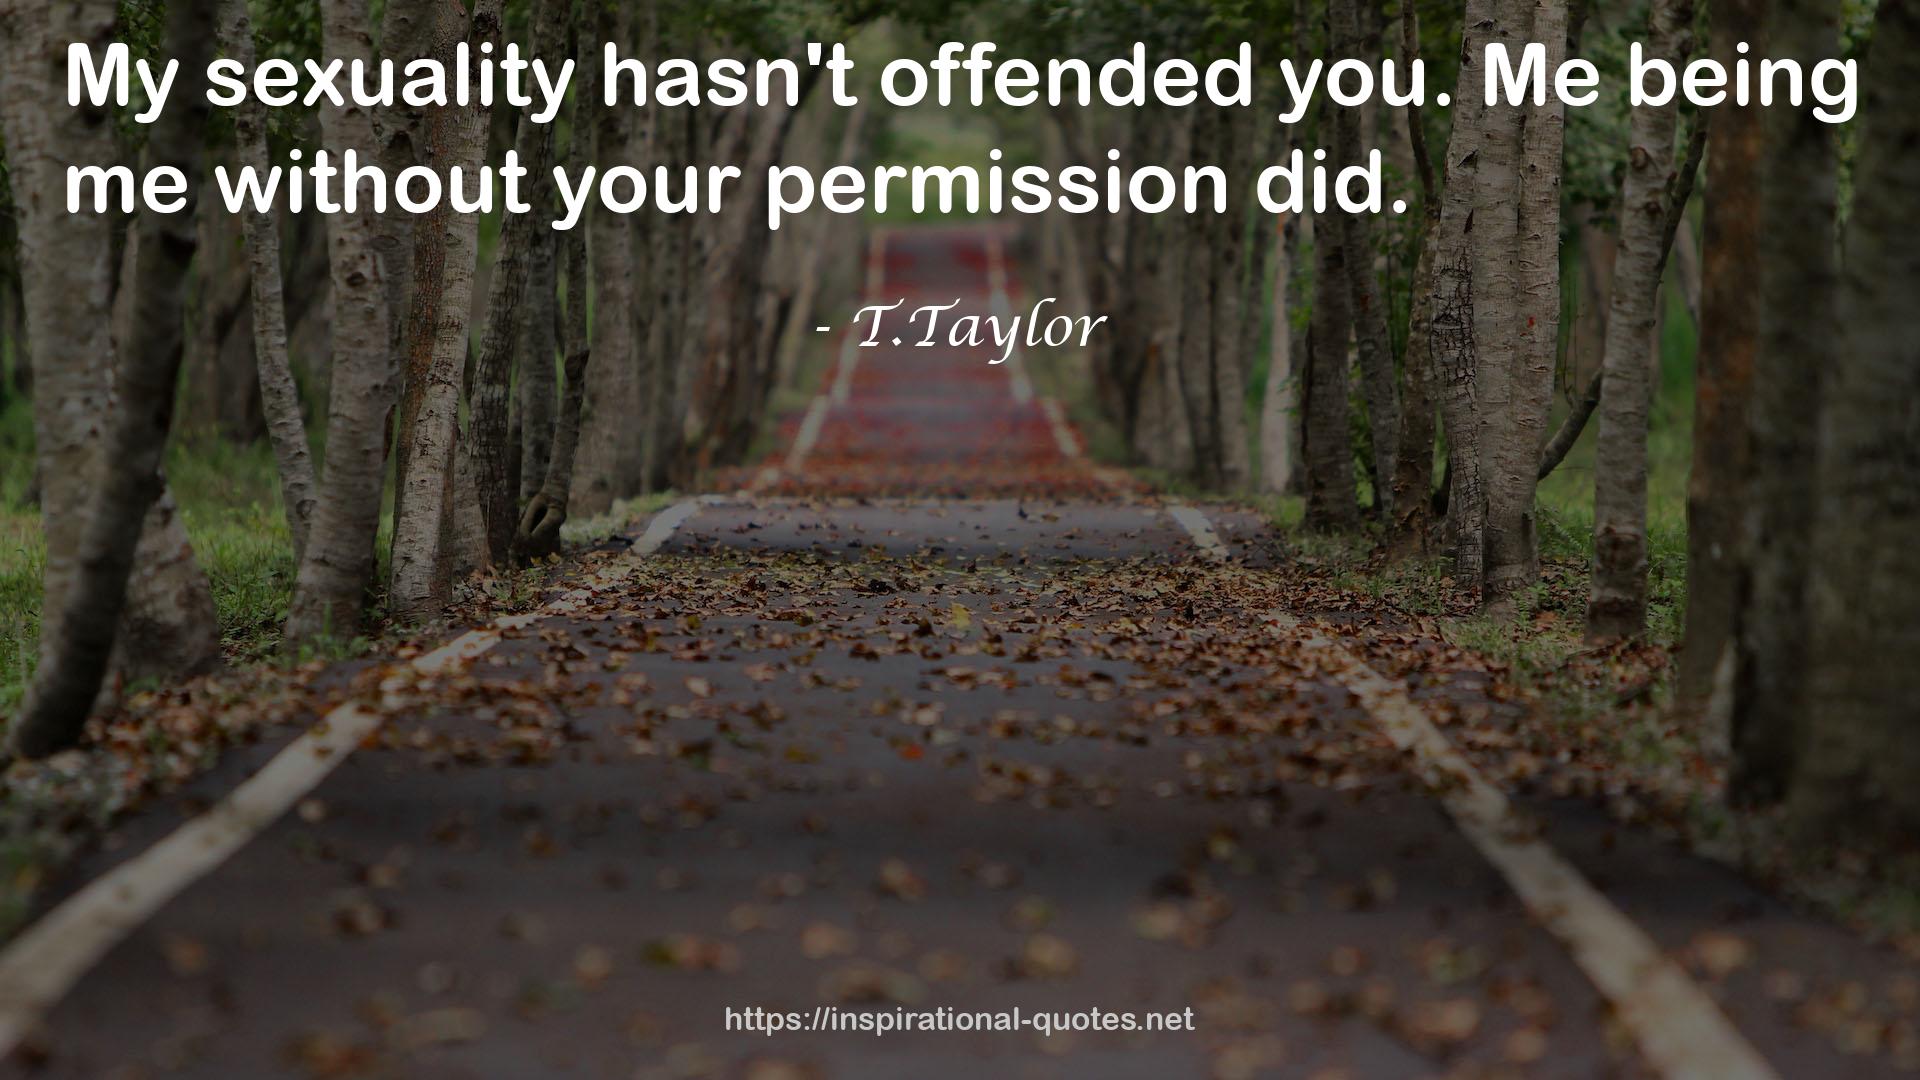 T.Taylor QUOTES